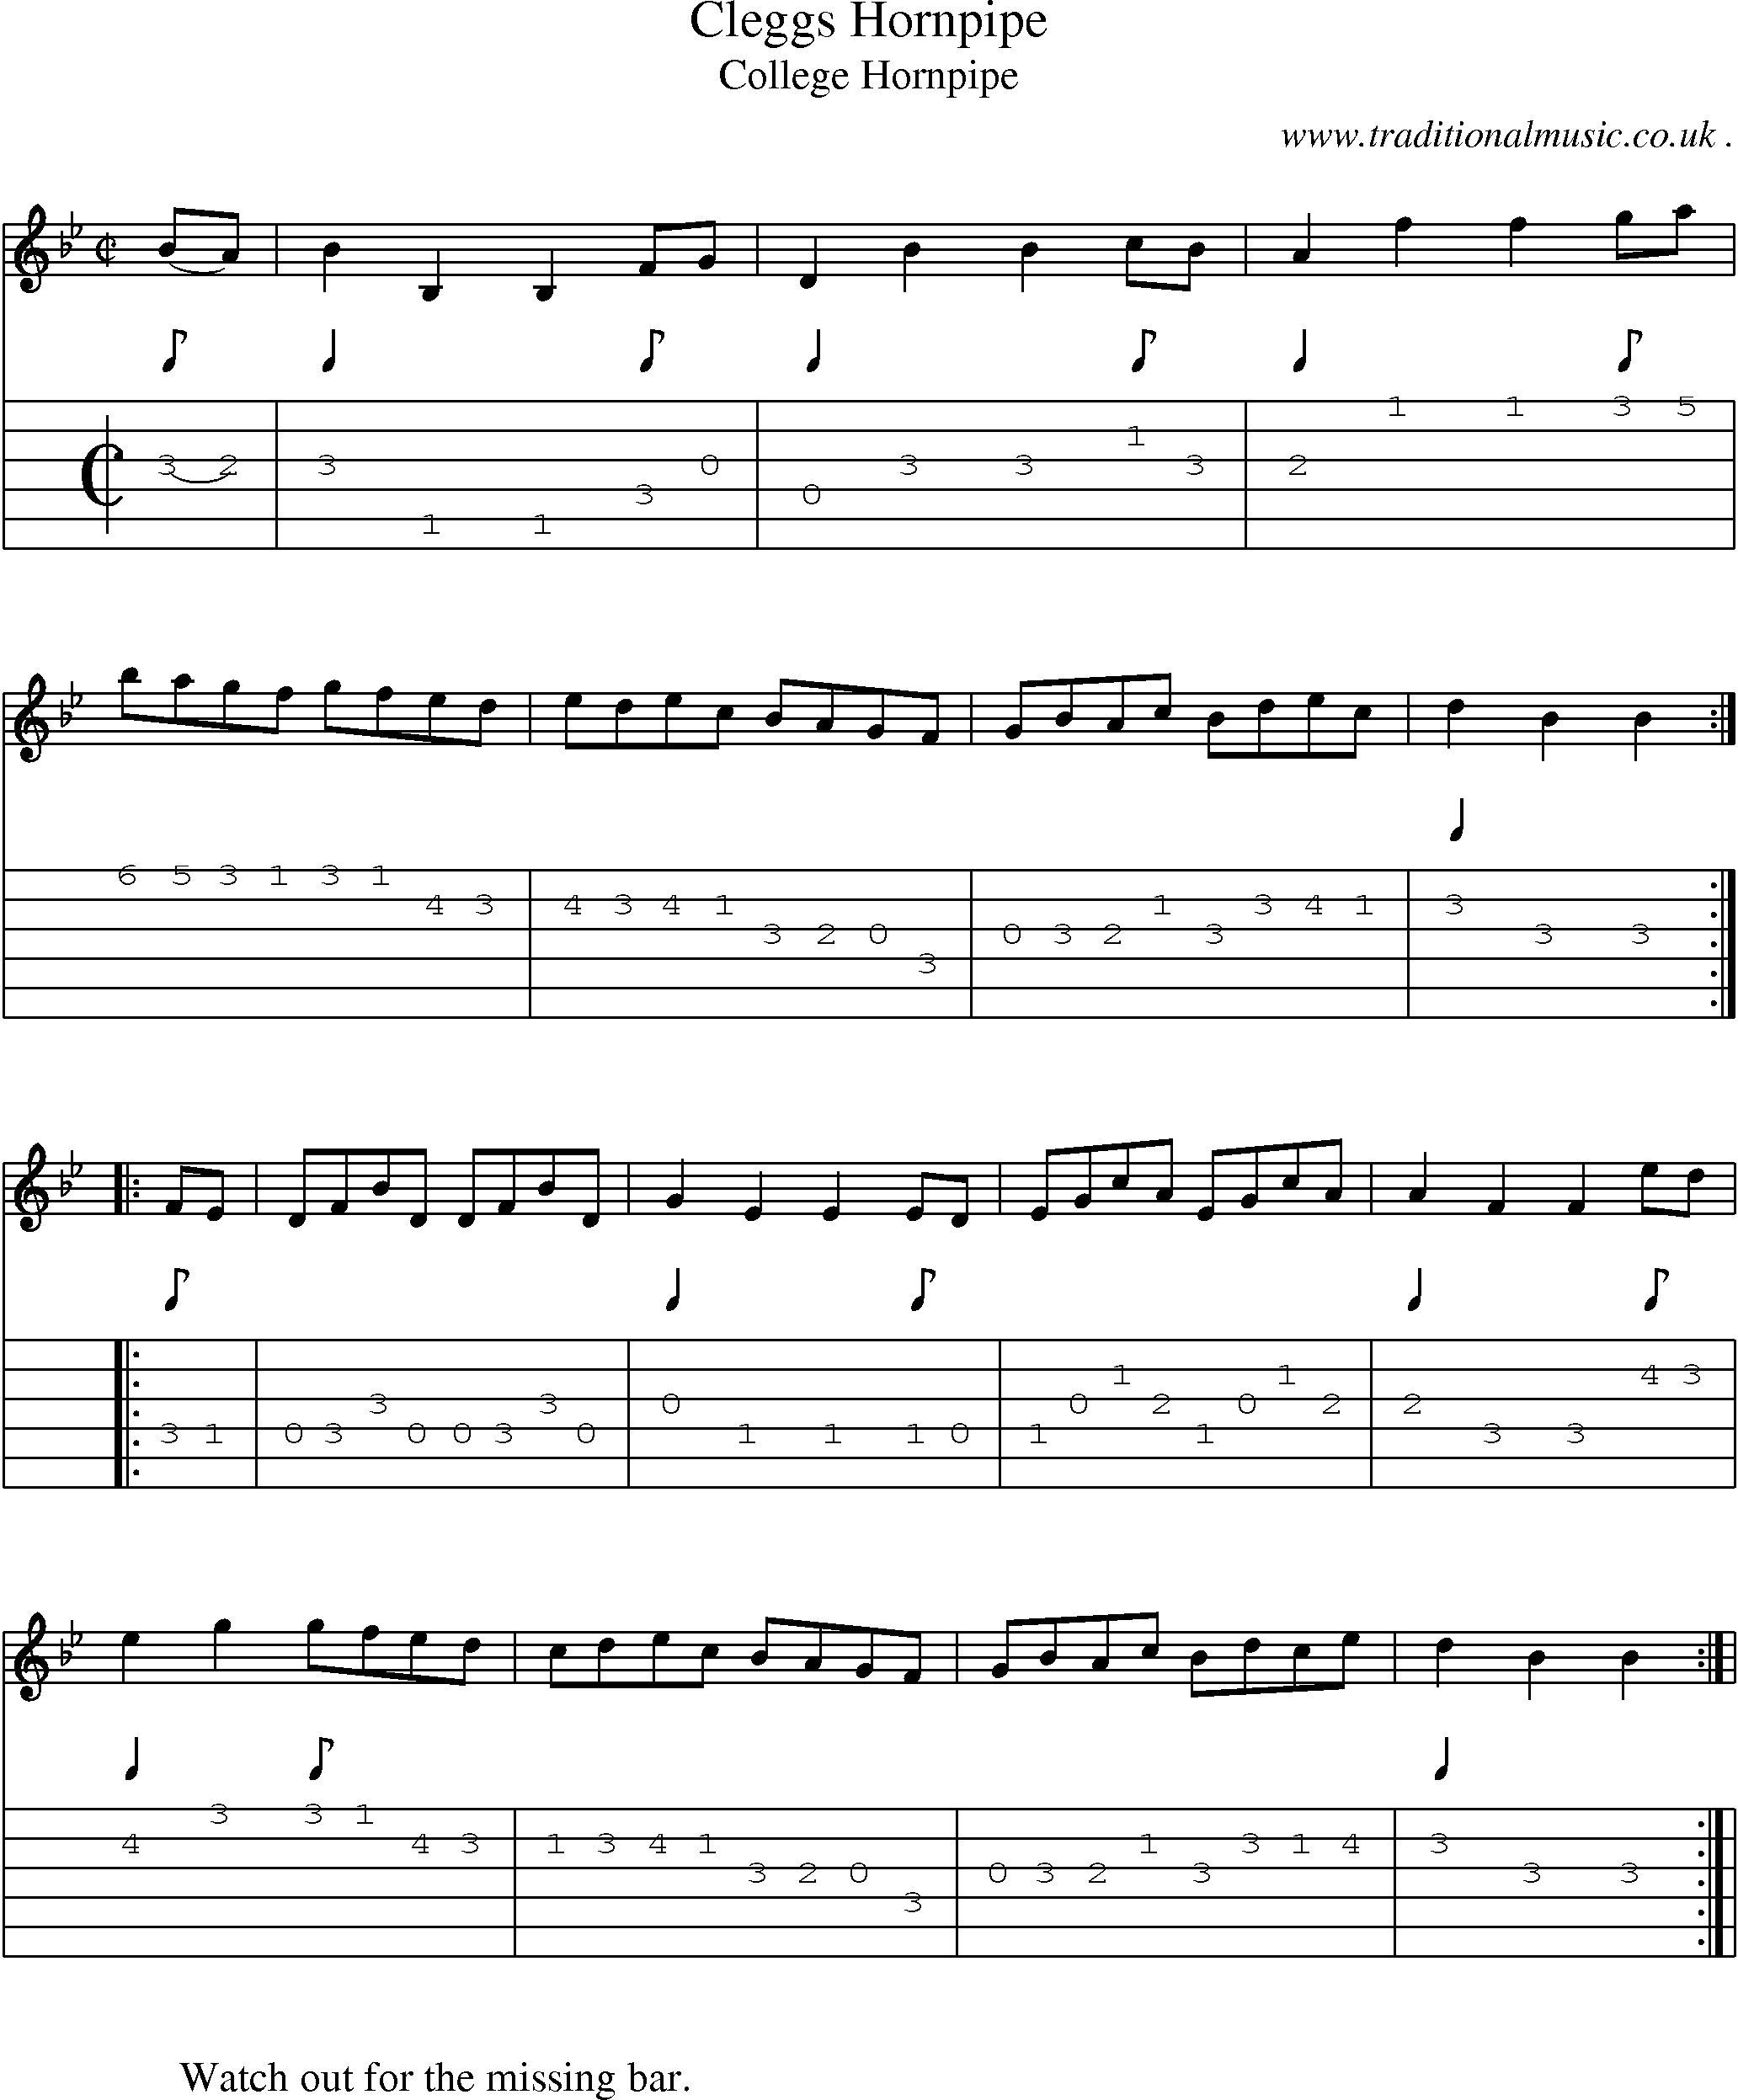 Sheet-Music and Guitar Tabs for Cleggs Hornpipe